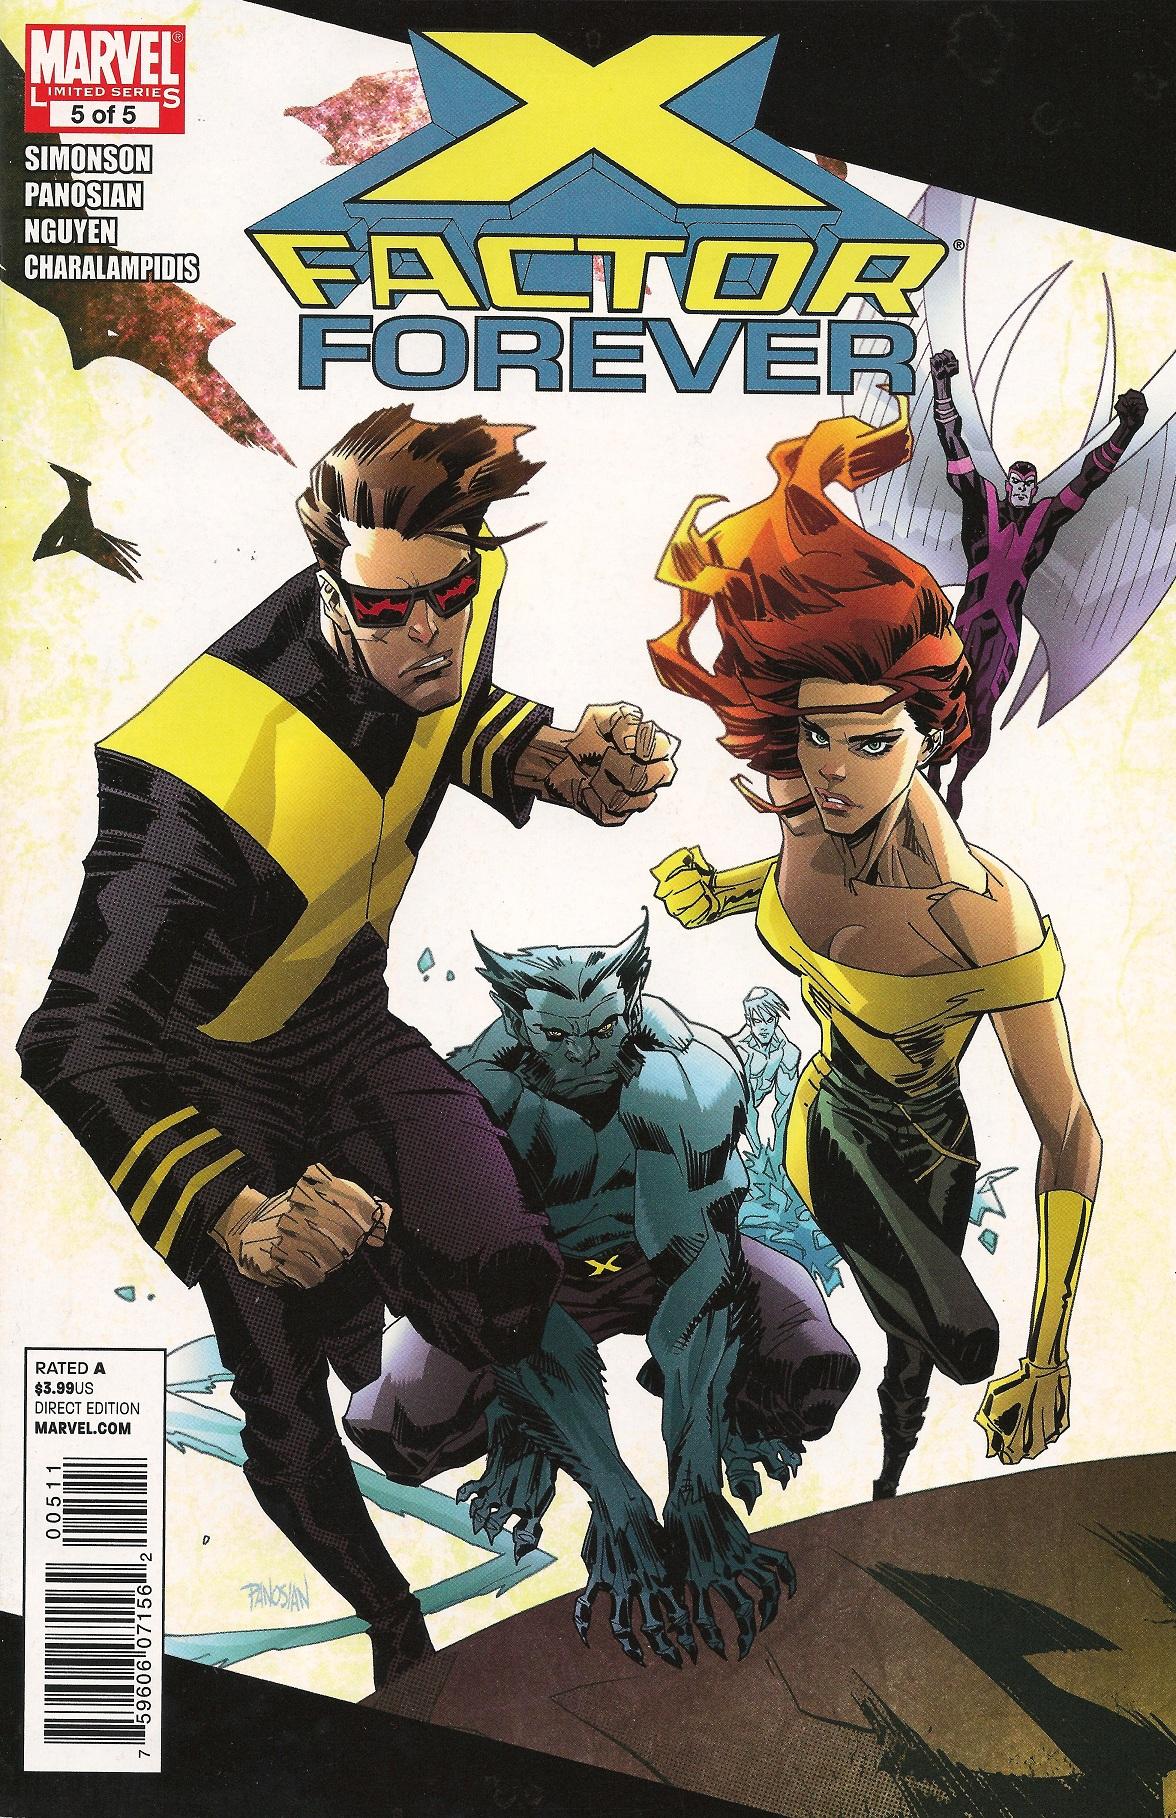 X-Factor Forever Vol. 1 #5